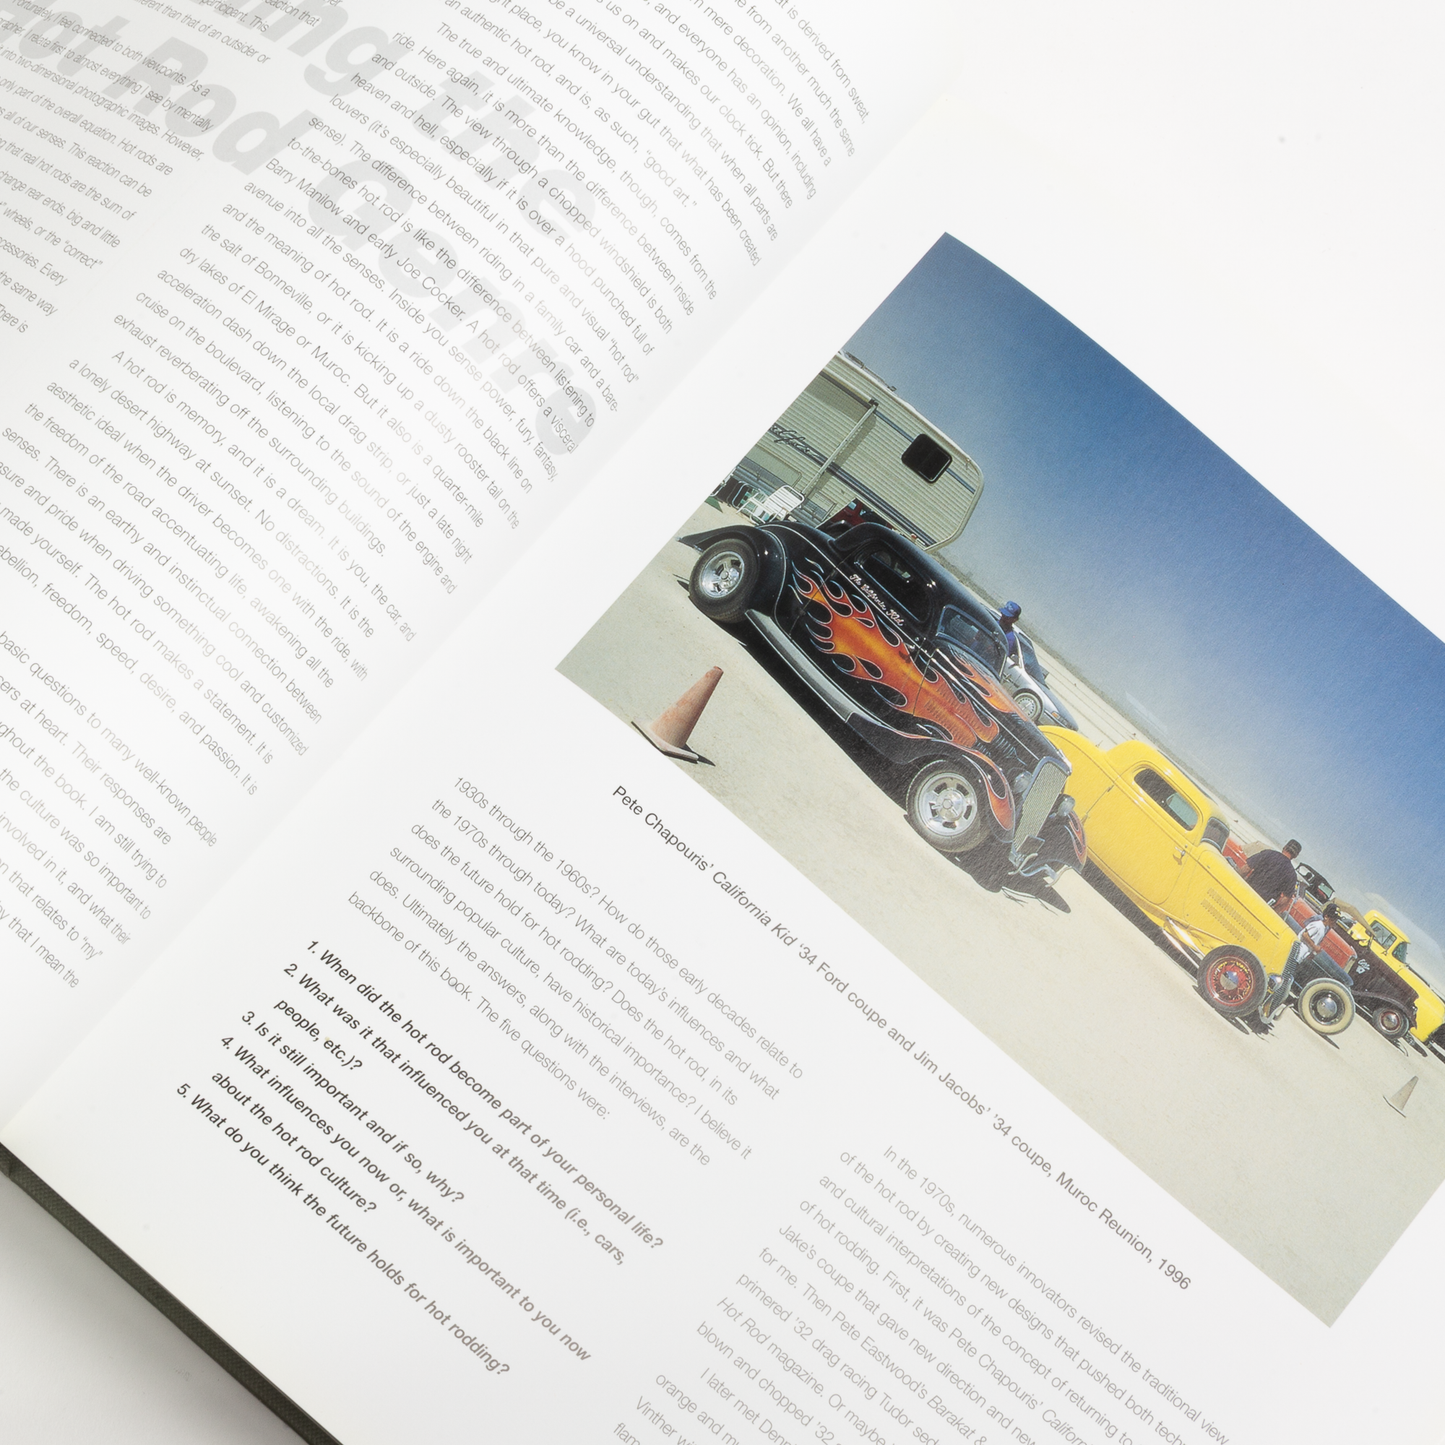 Hot Rod - The Photography of Peter Vincent